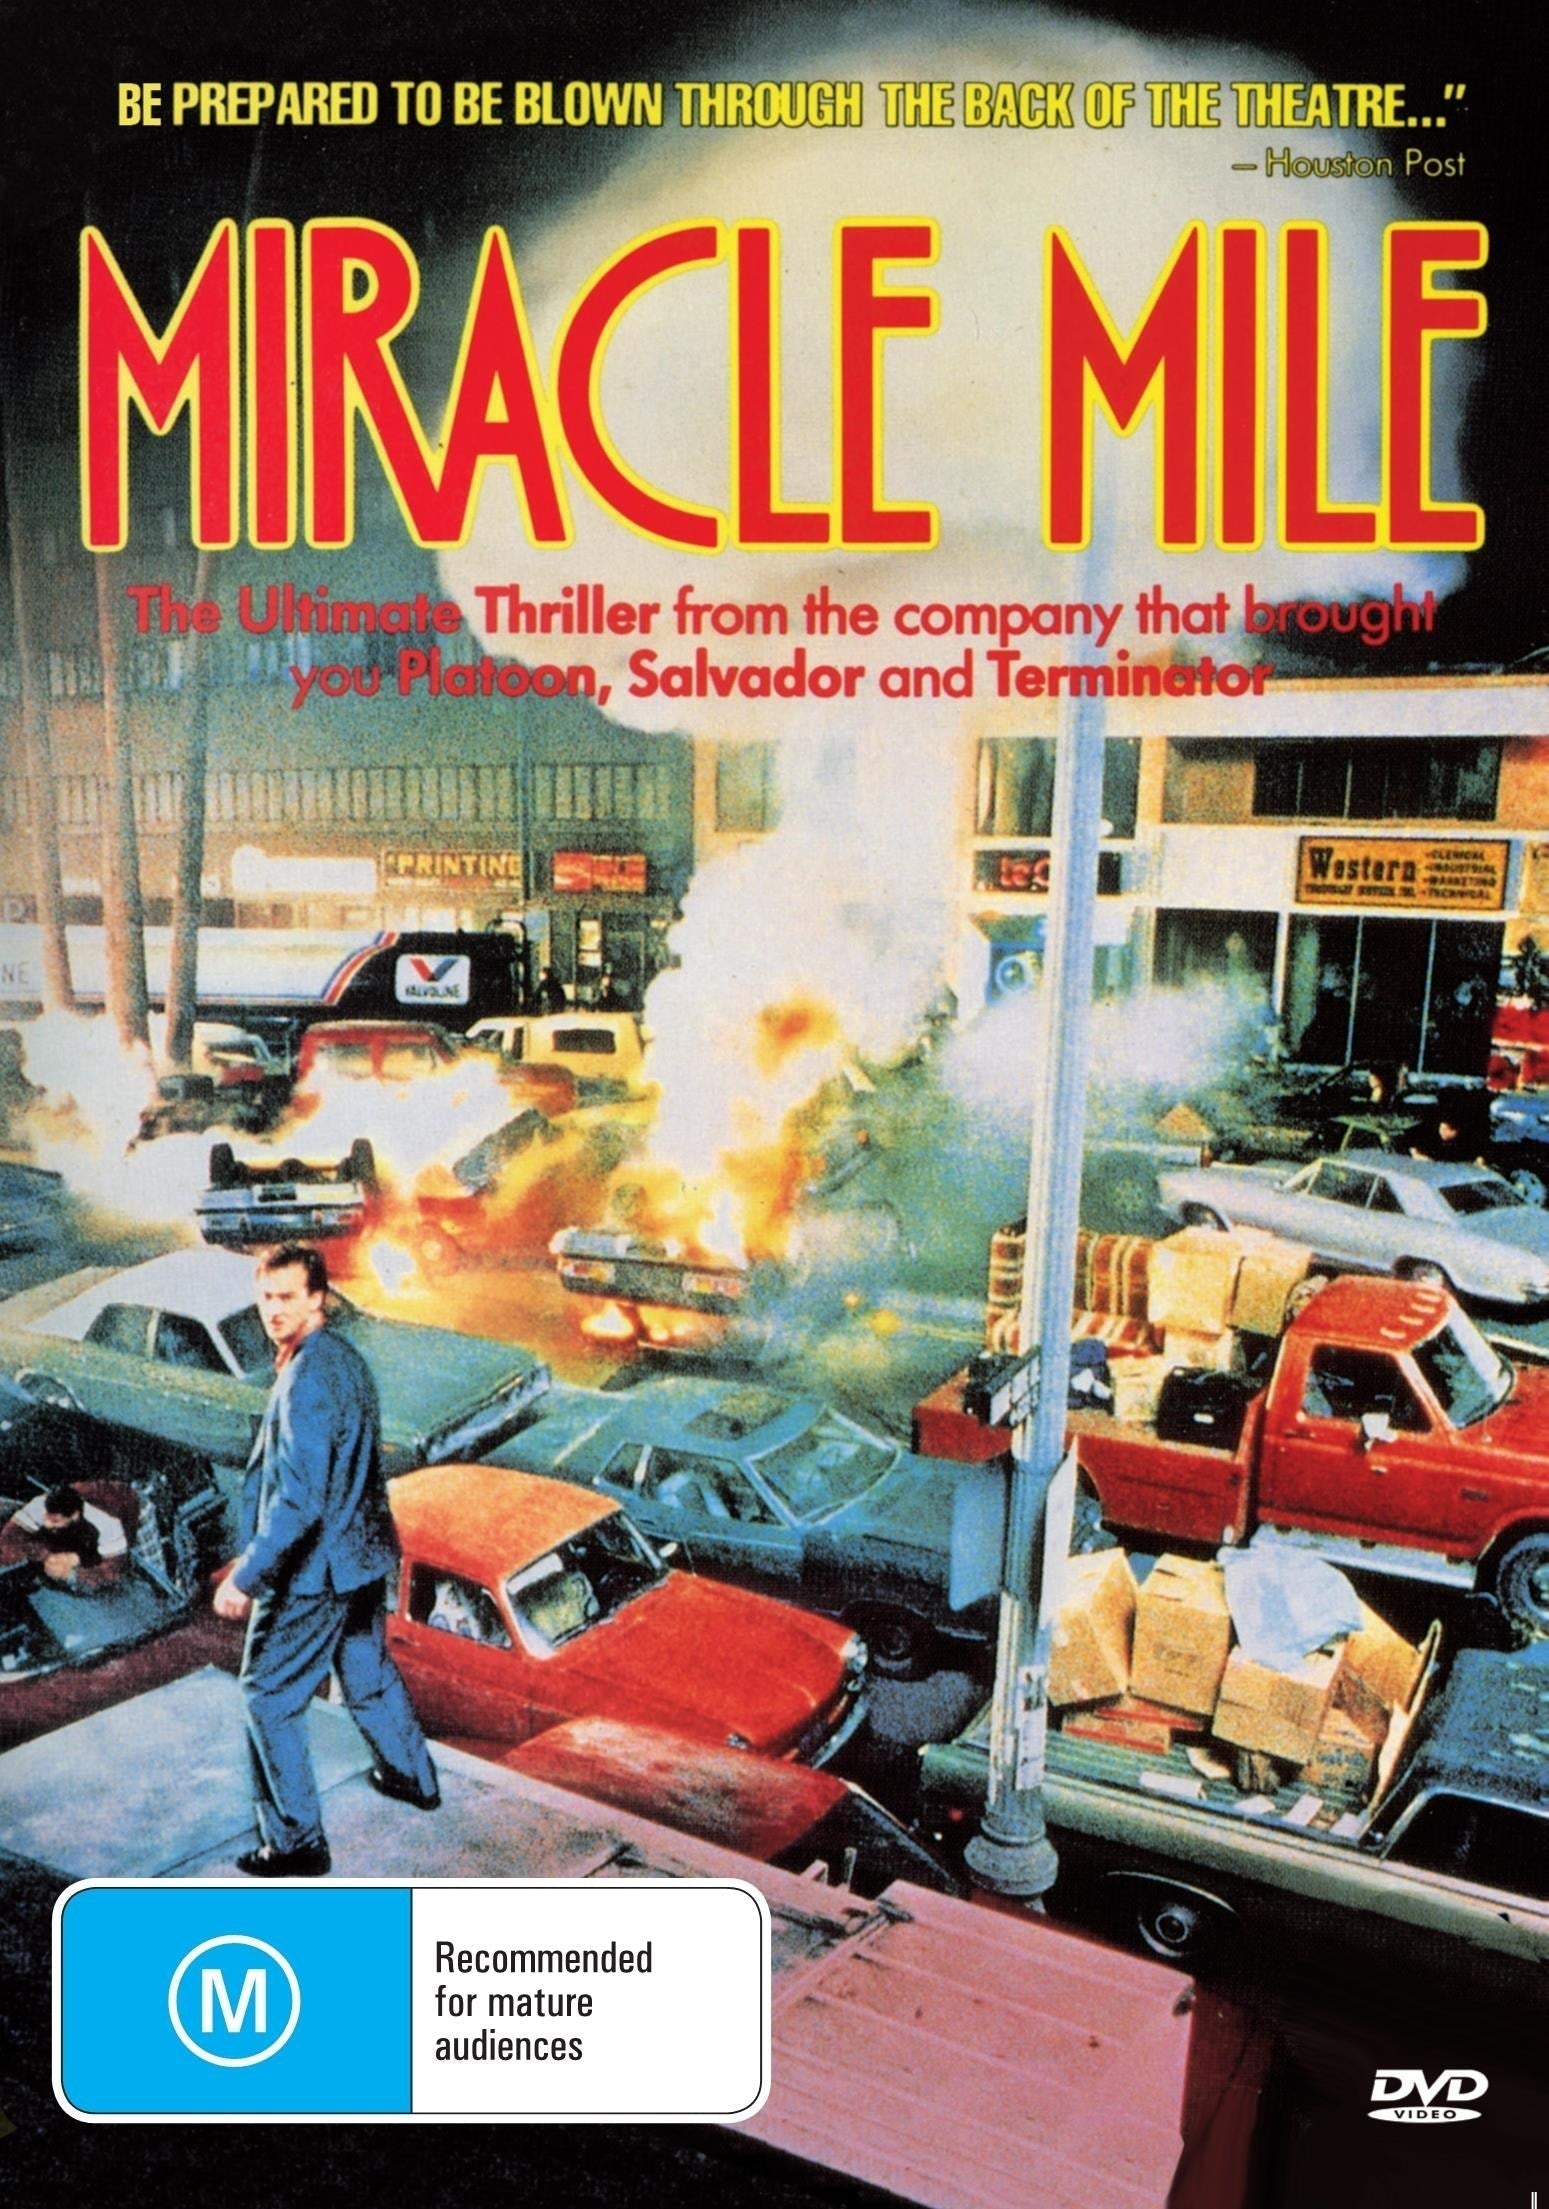 Miracle Mile  rareandcollectibledvds